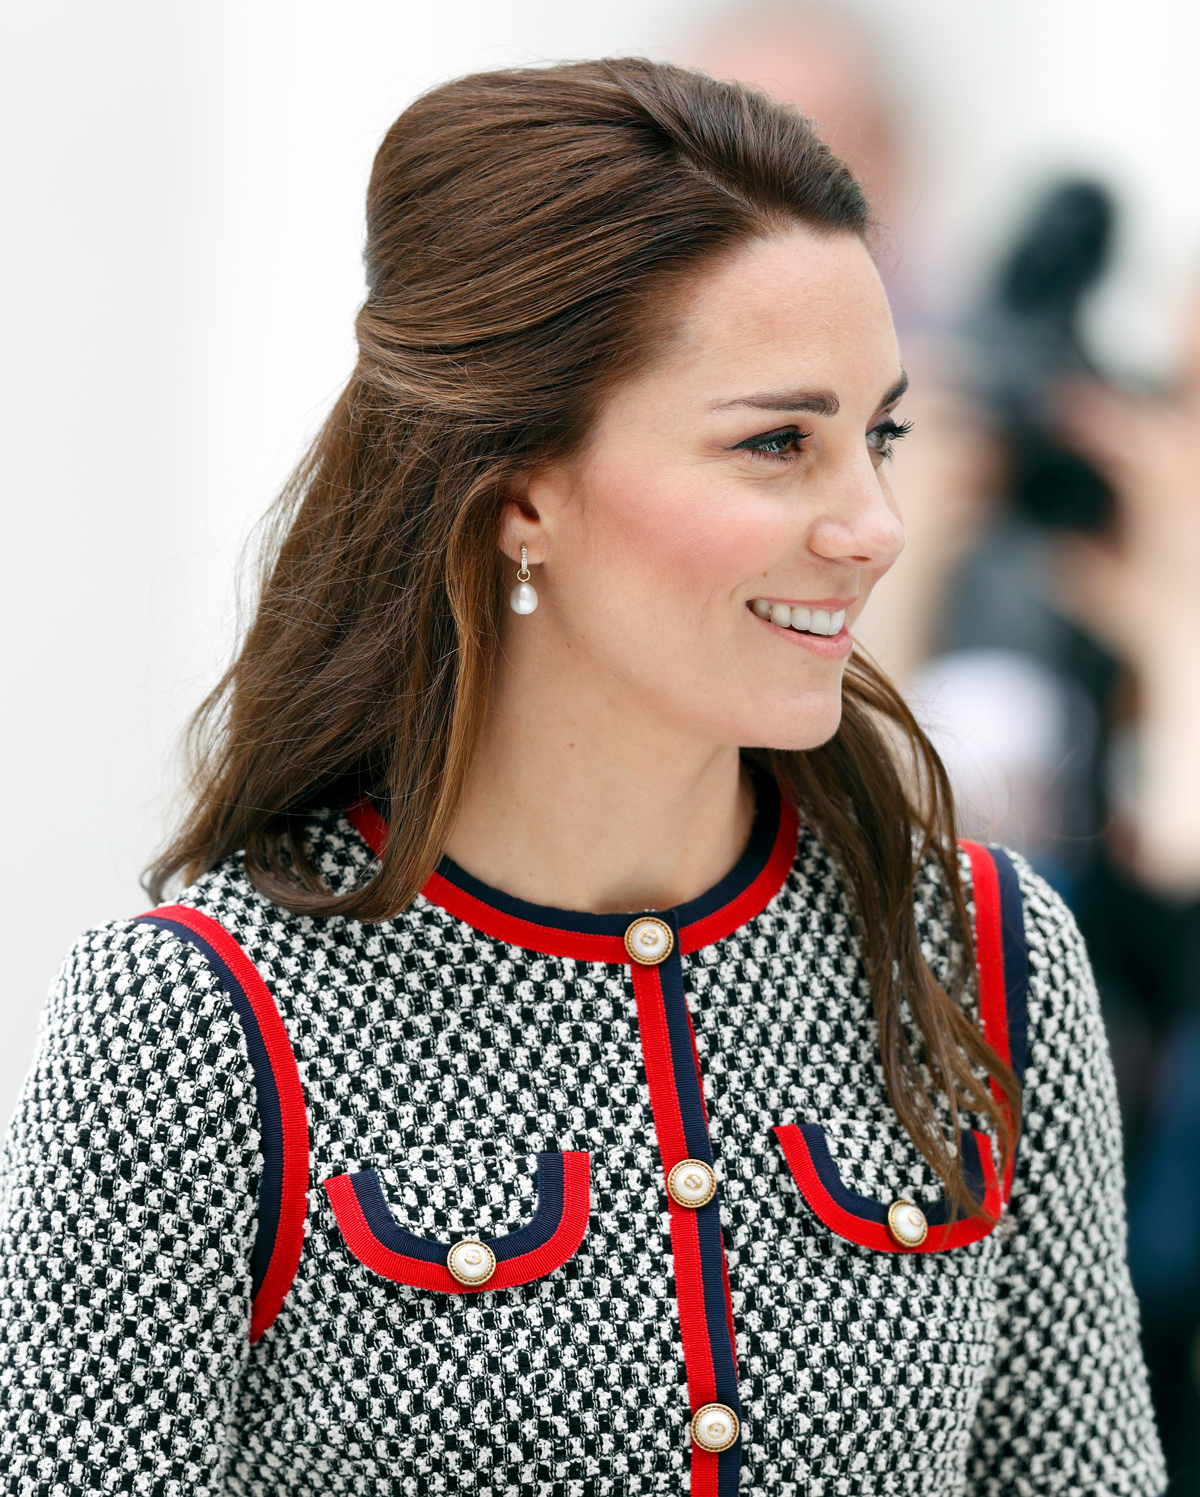 Kate Middleton's Favorite Jewelry, Including Earrings and Necklaces